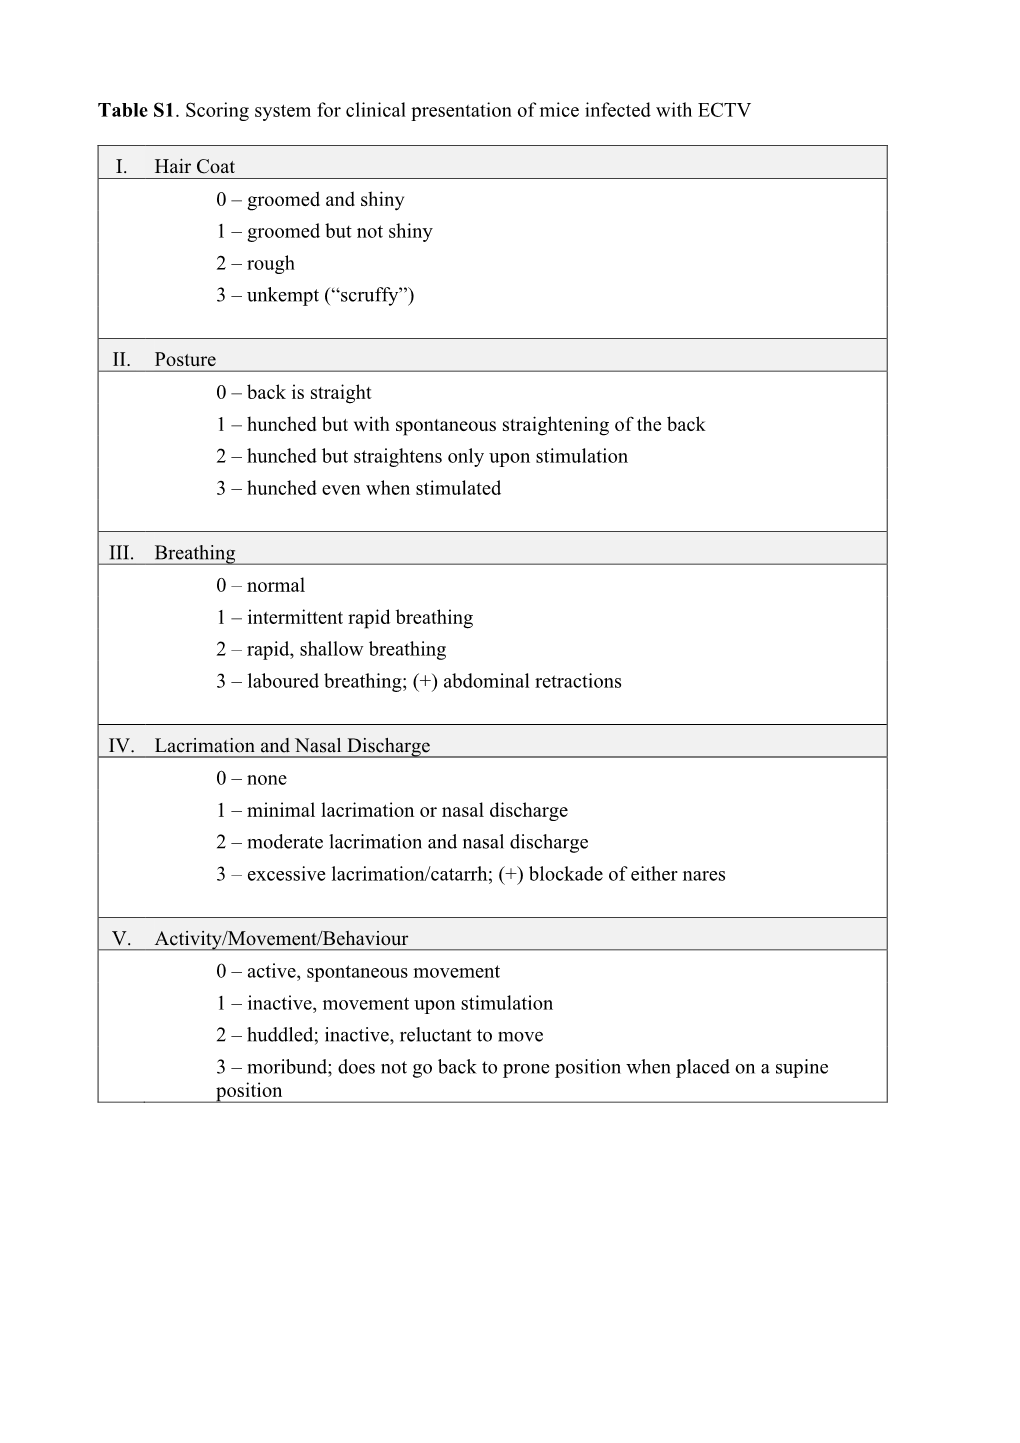 Table S1. Scoring System for Clinical Presentation of Mice Infected with ECTV